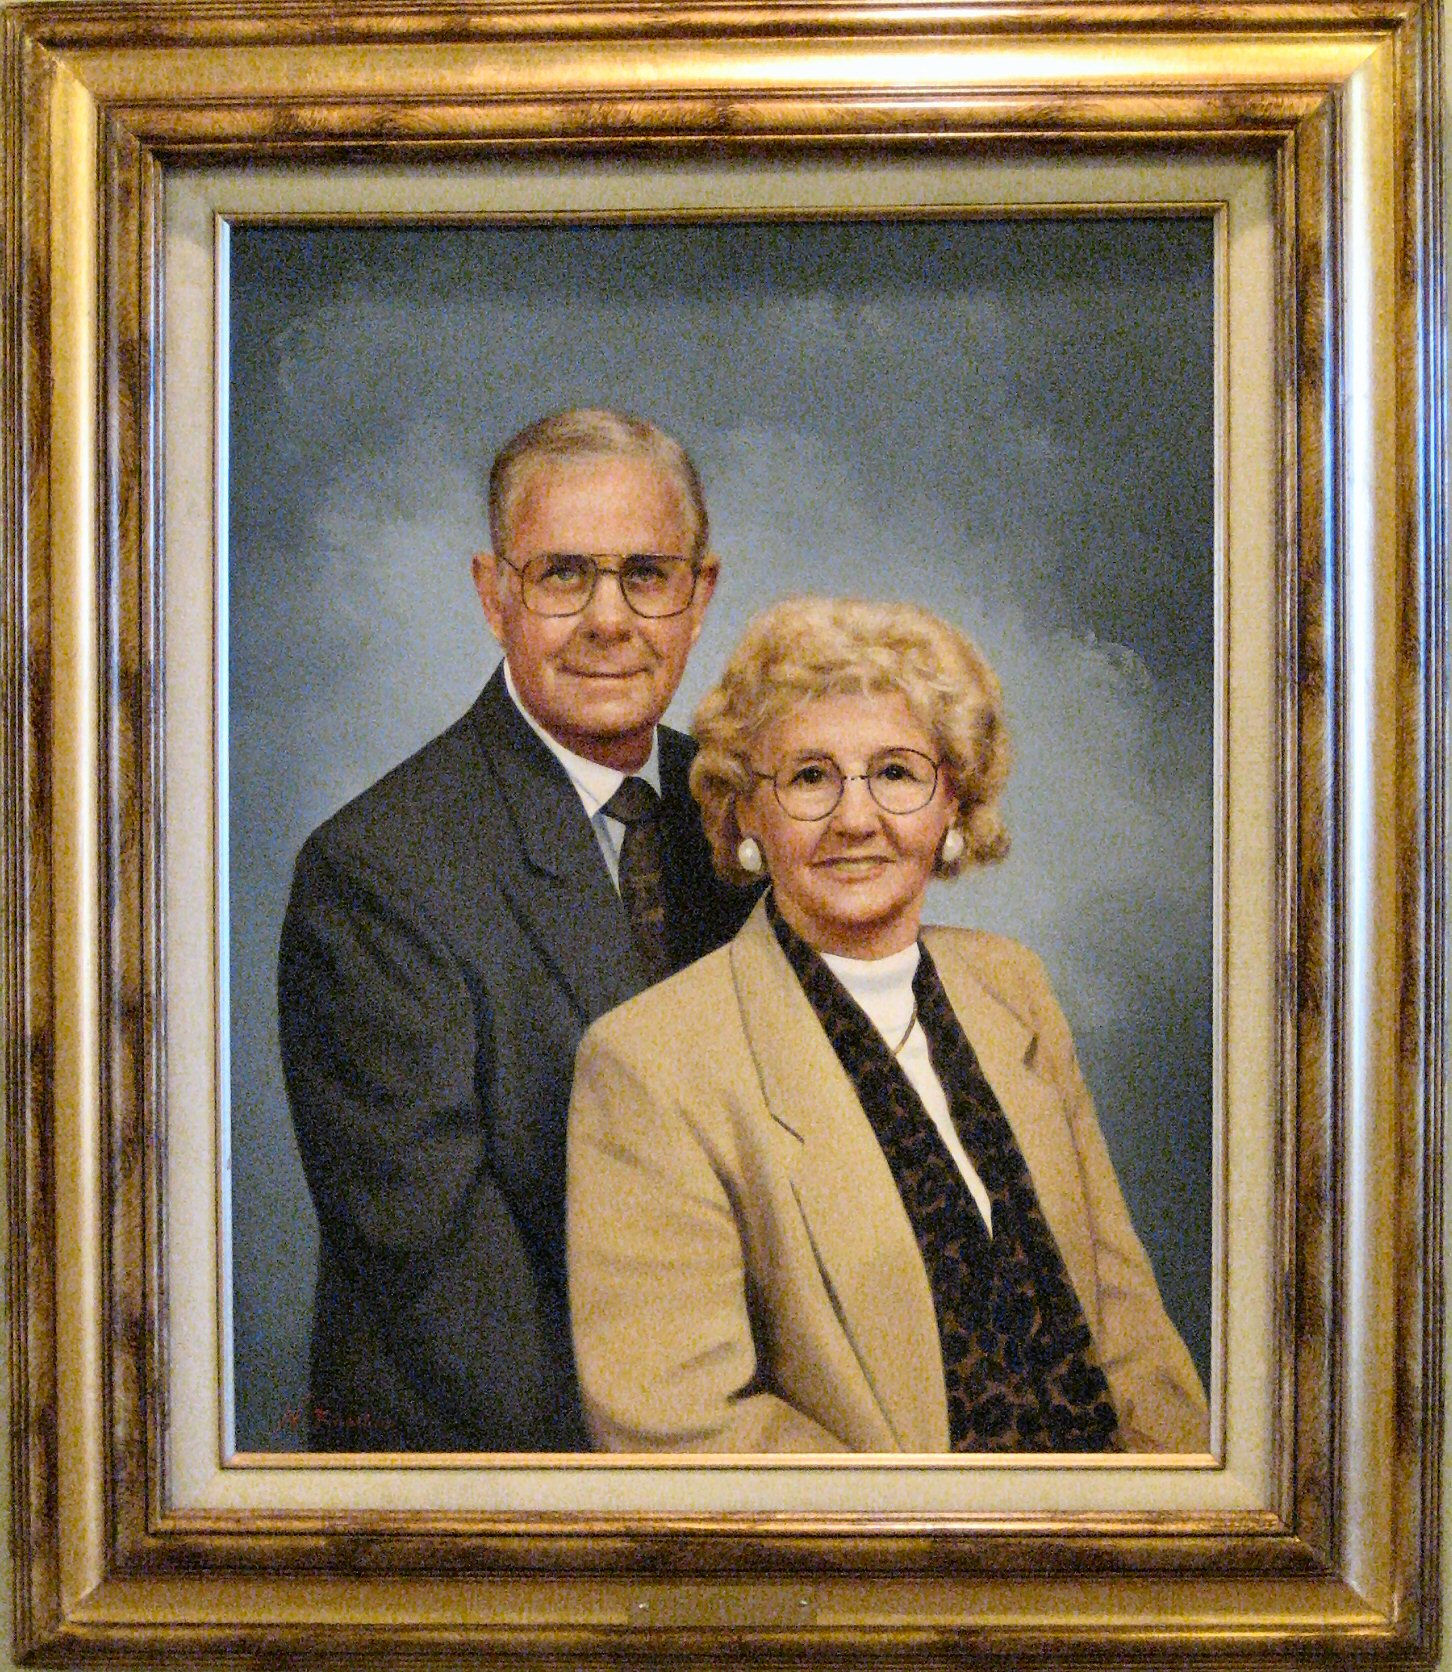 Walter and Norma Hedges